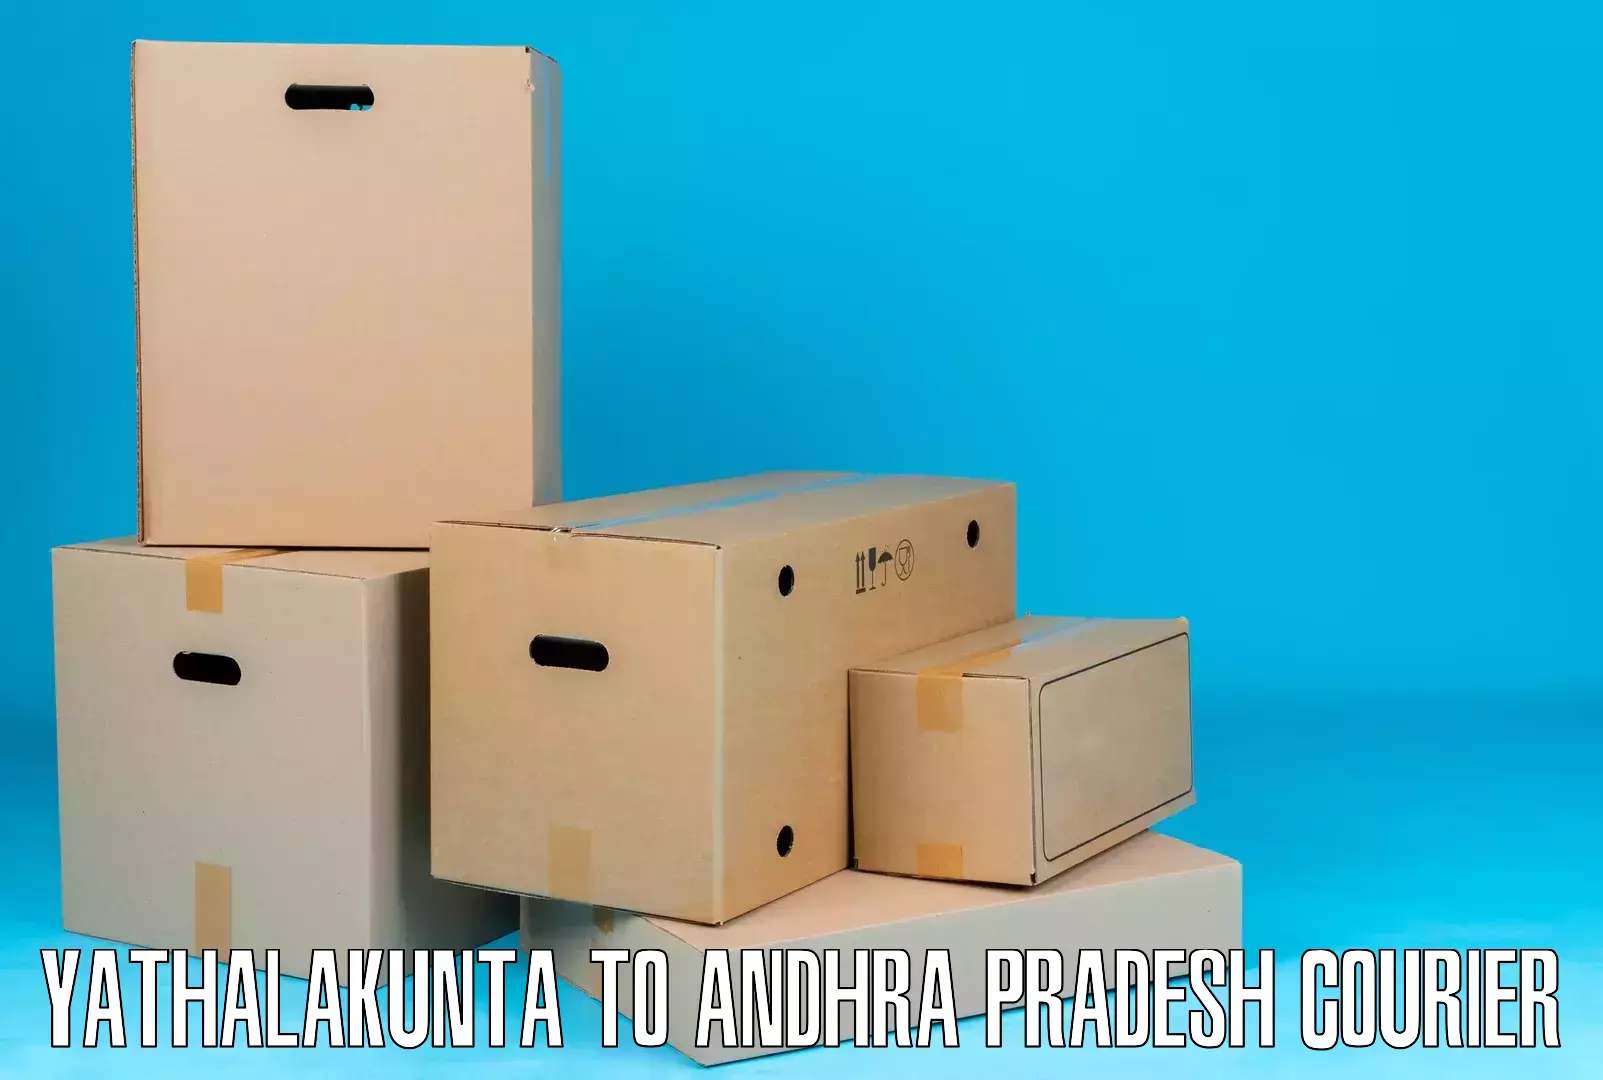 Nationwide parcel services Yathalakunta to Nellore